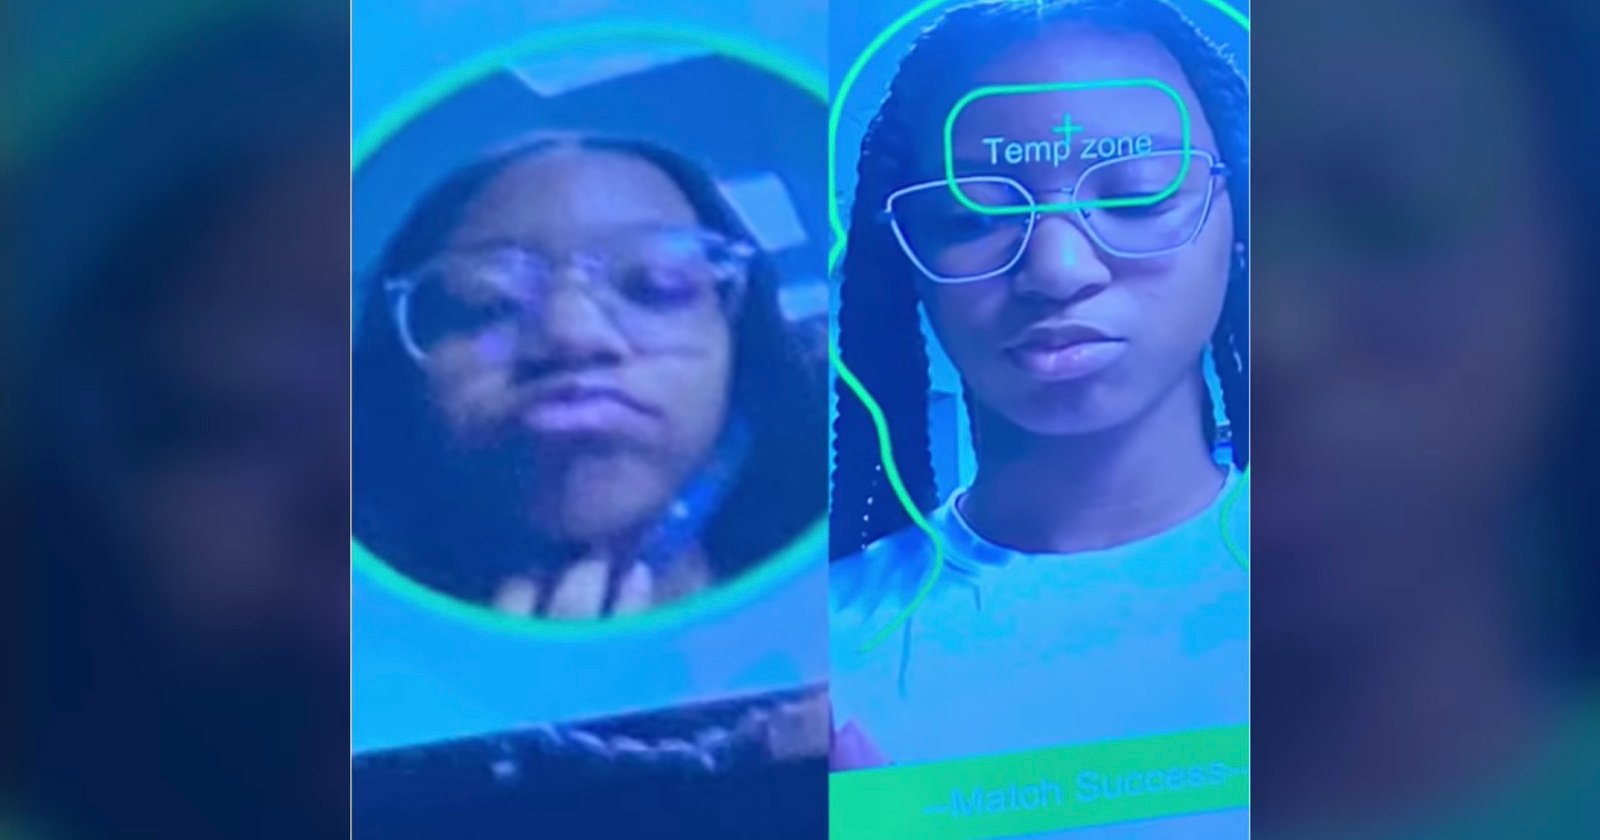 A Detroit-area skating rink is under fire for barring entry to a Black teenager after its facial recognition cameras misidentified her as a woman who 